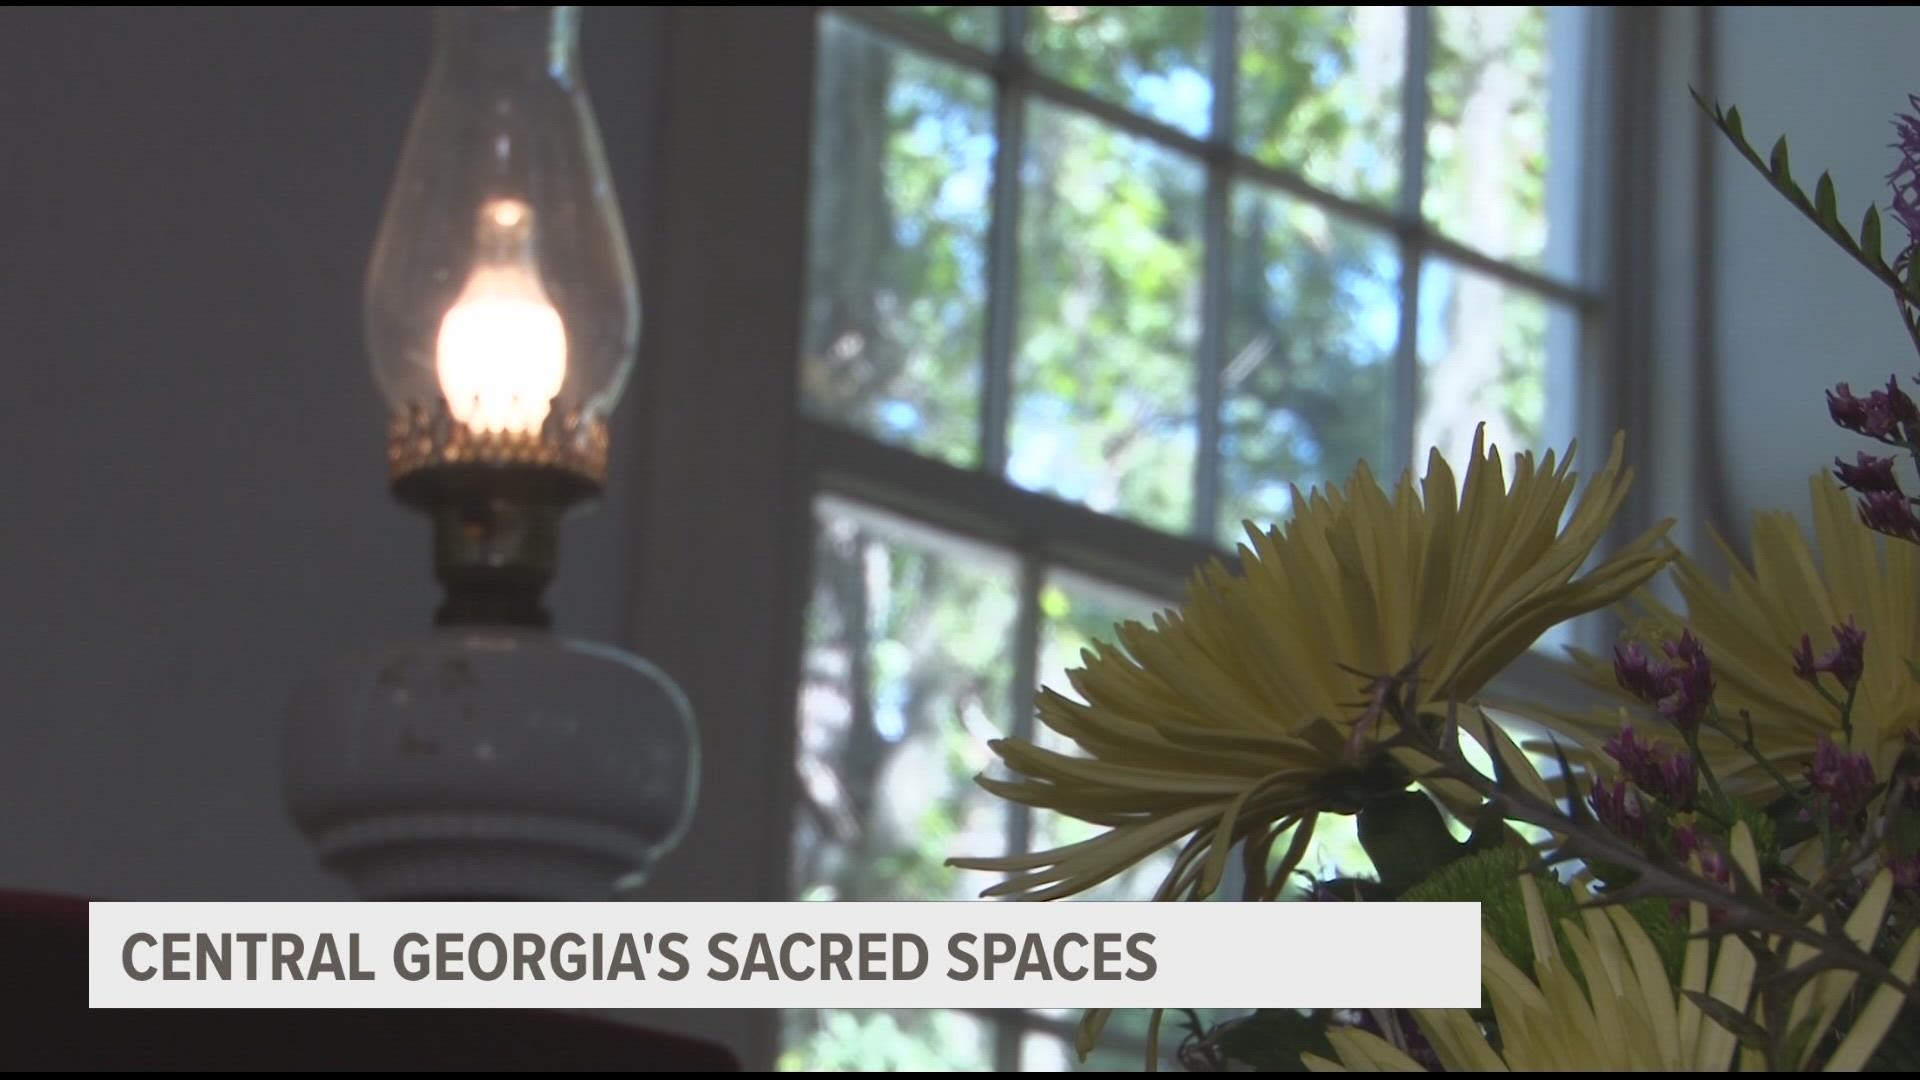 13WMAZ's Suzanne Lawler takes a look at the history of various houses of worship around Central Georgia.